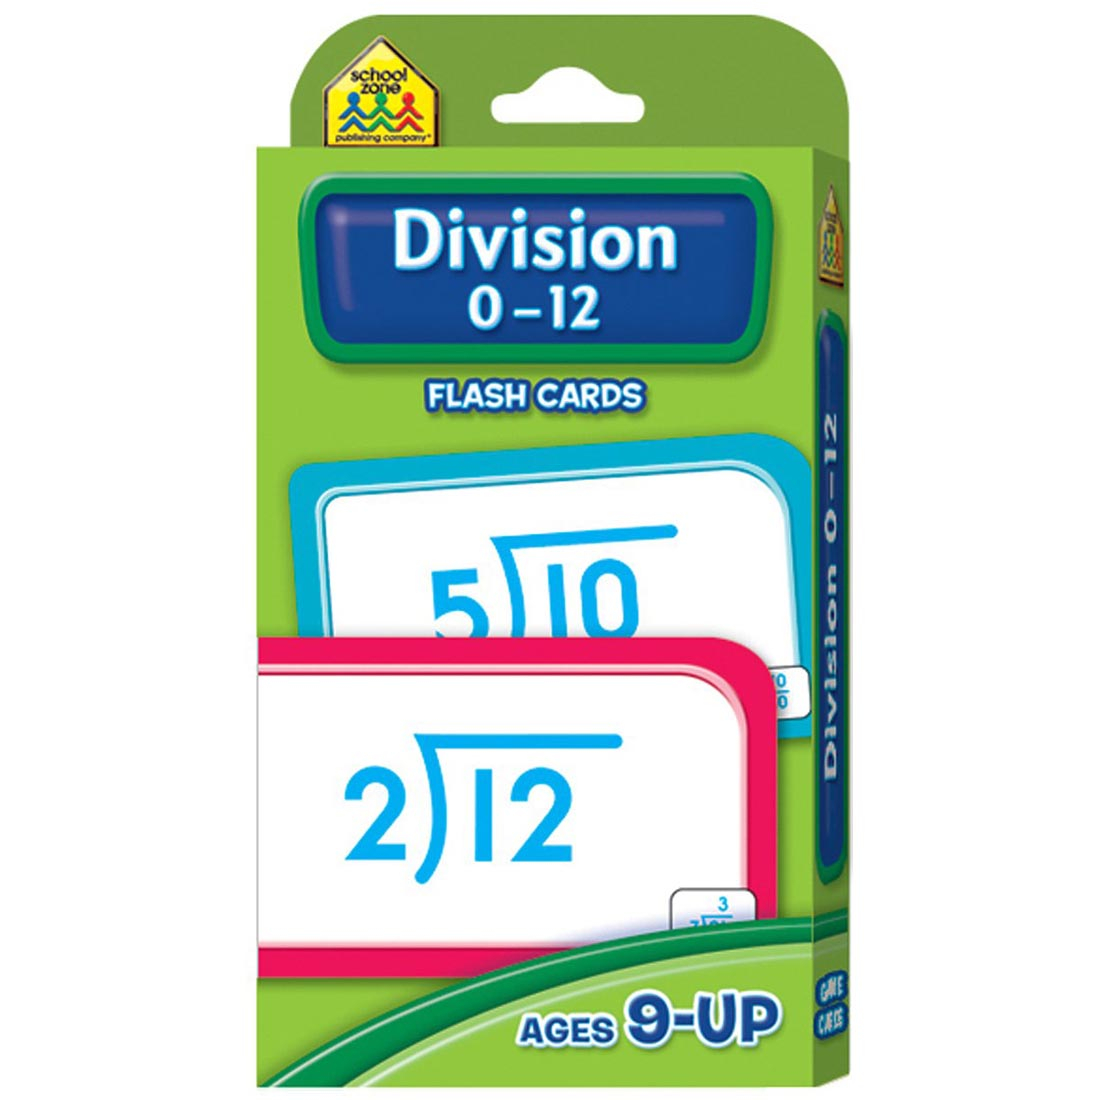 Details About School Zone Division 0-12 Flash Cards - Division 0-12 Flash  Cards